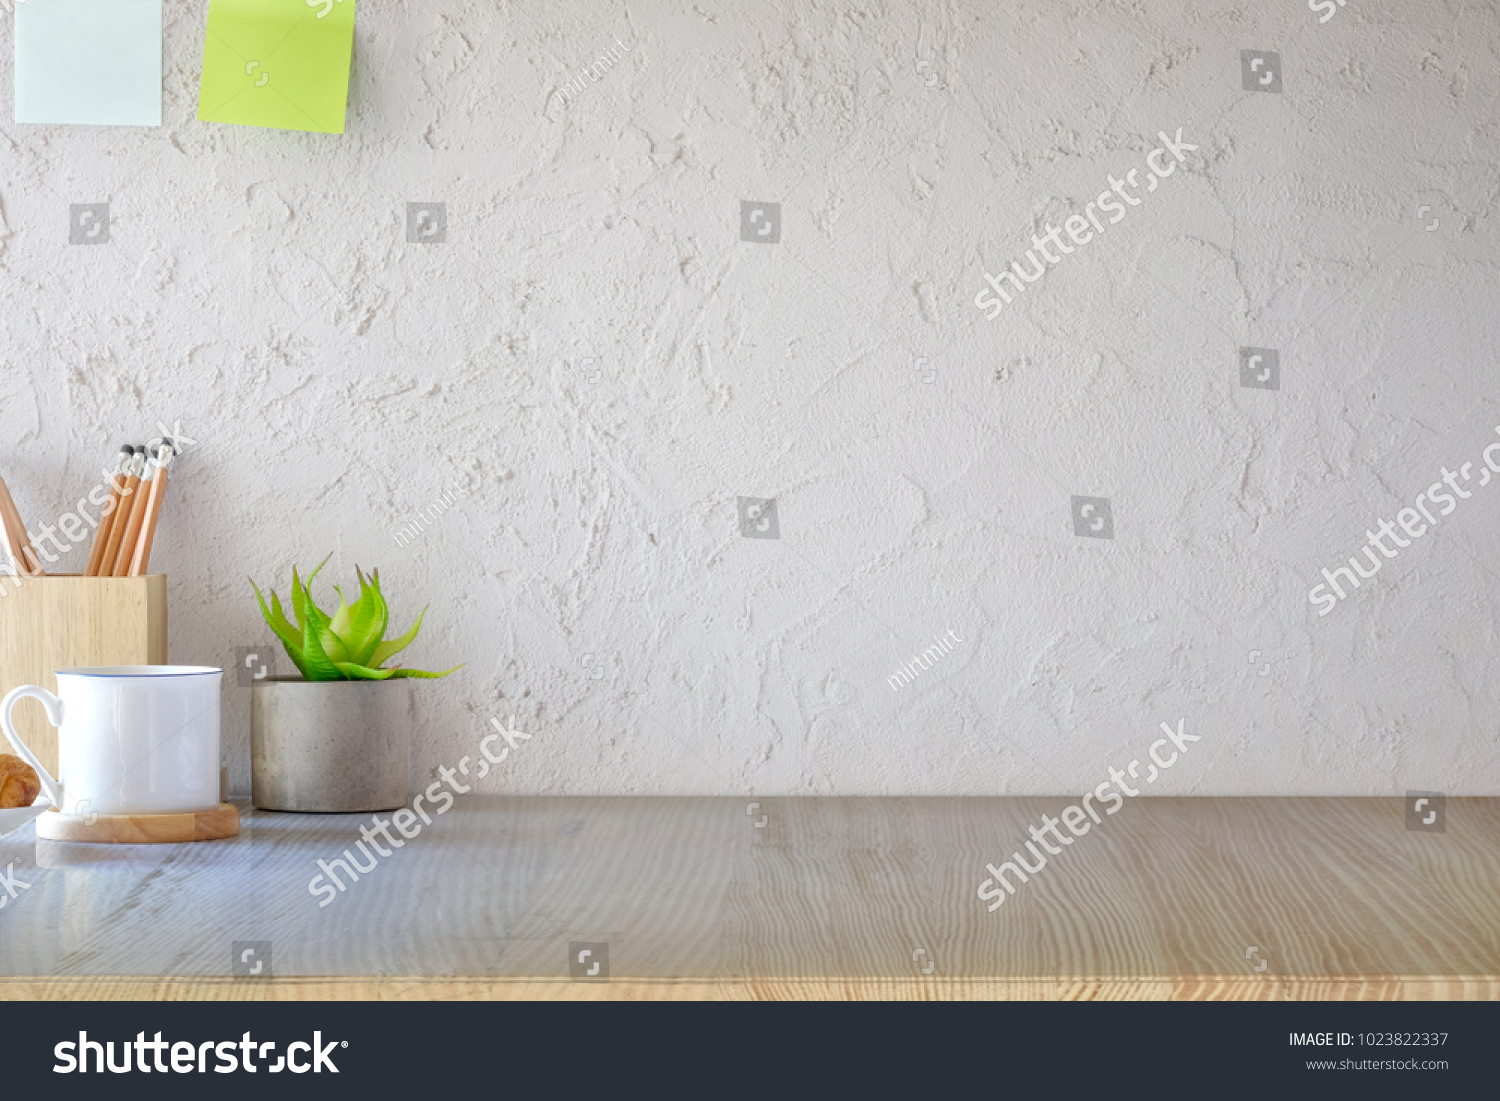 Front view of wood desk with coffee mug and house plant. workspace and copy space #1023822337